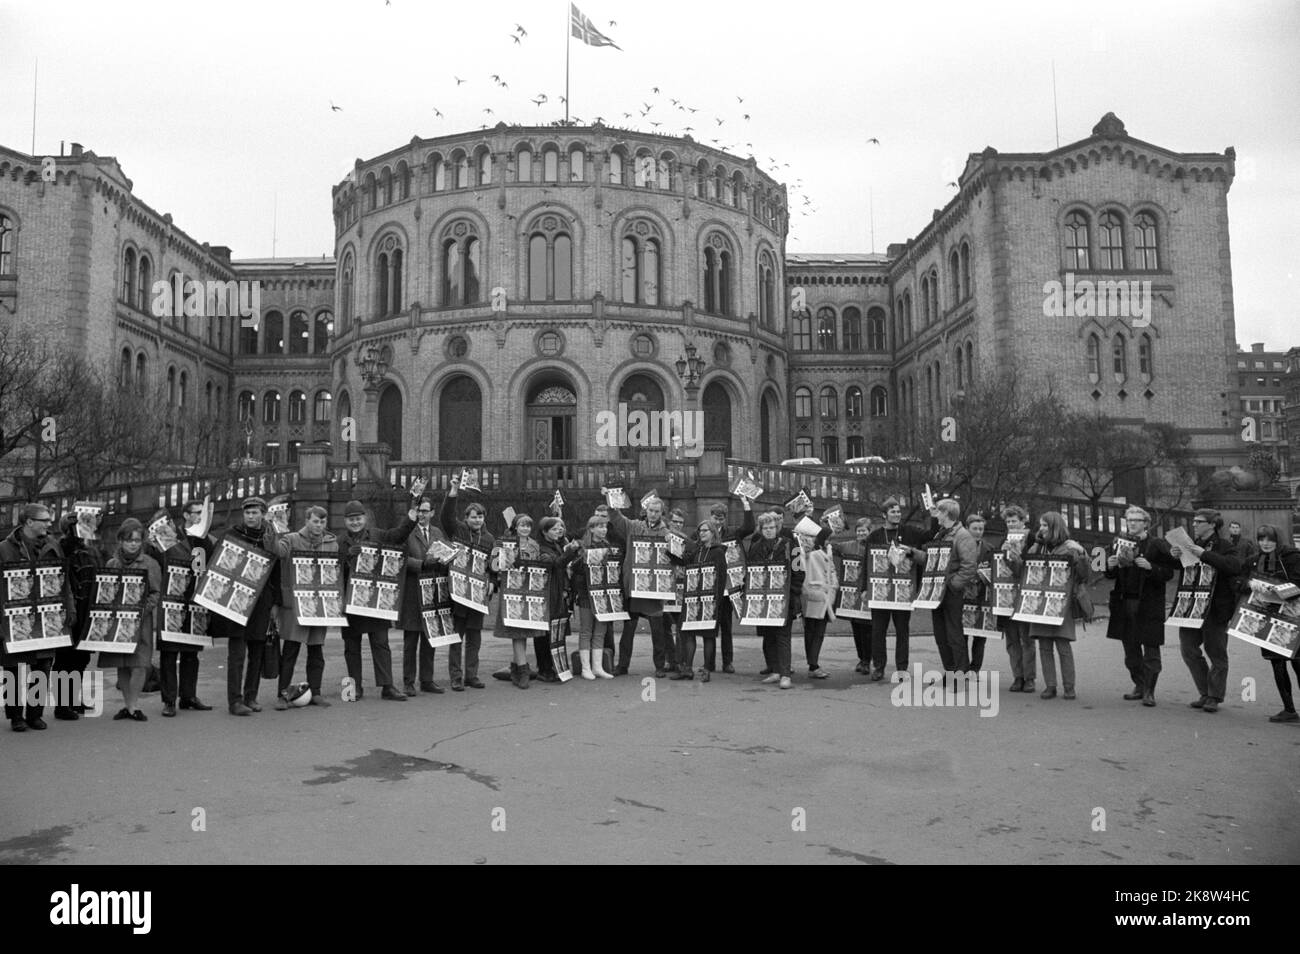 Oslo 196611. Action against the war in Vietnam. 100 00 members from a number of organizations will demonstrate in support of the UN's three requirements for the United States to end the war in Vietnam. There are youth behind the demonstration, which will take place on human rights day December 10. The picture shows representatives of the youth organizations with posters in front of the Storting. Photo Jan Erik Olsen / Current / NTB Stock Photo